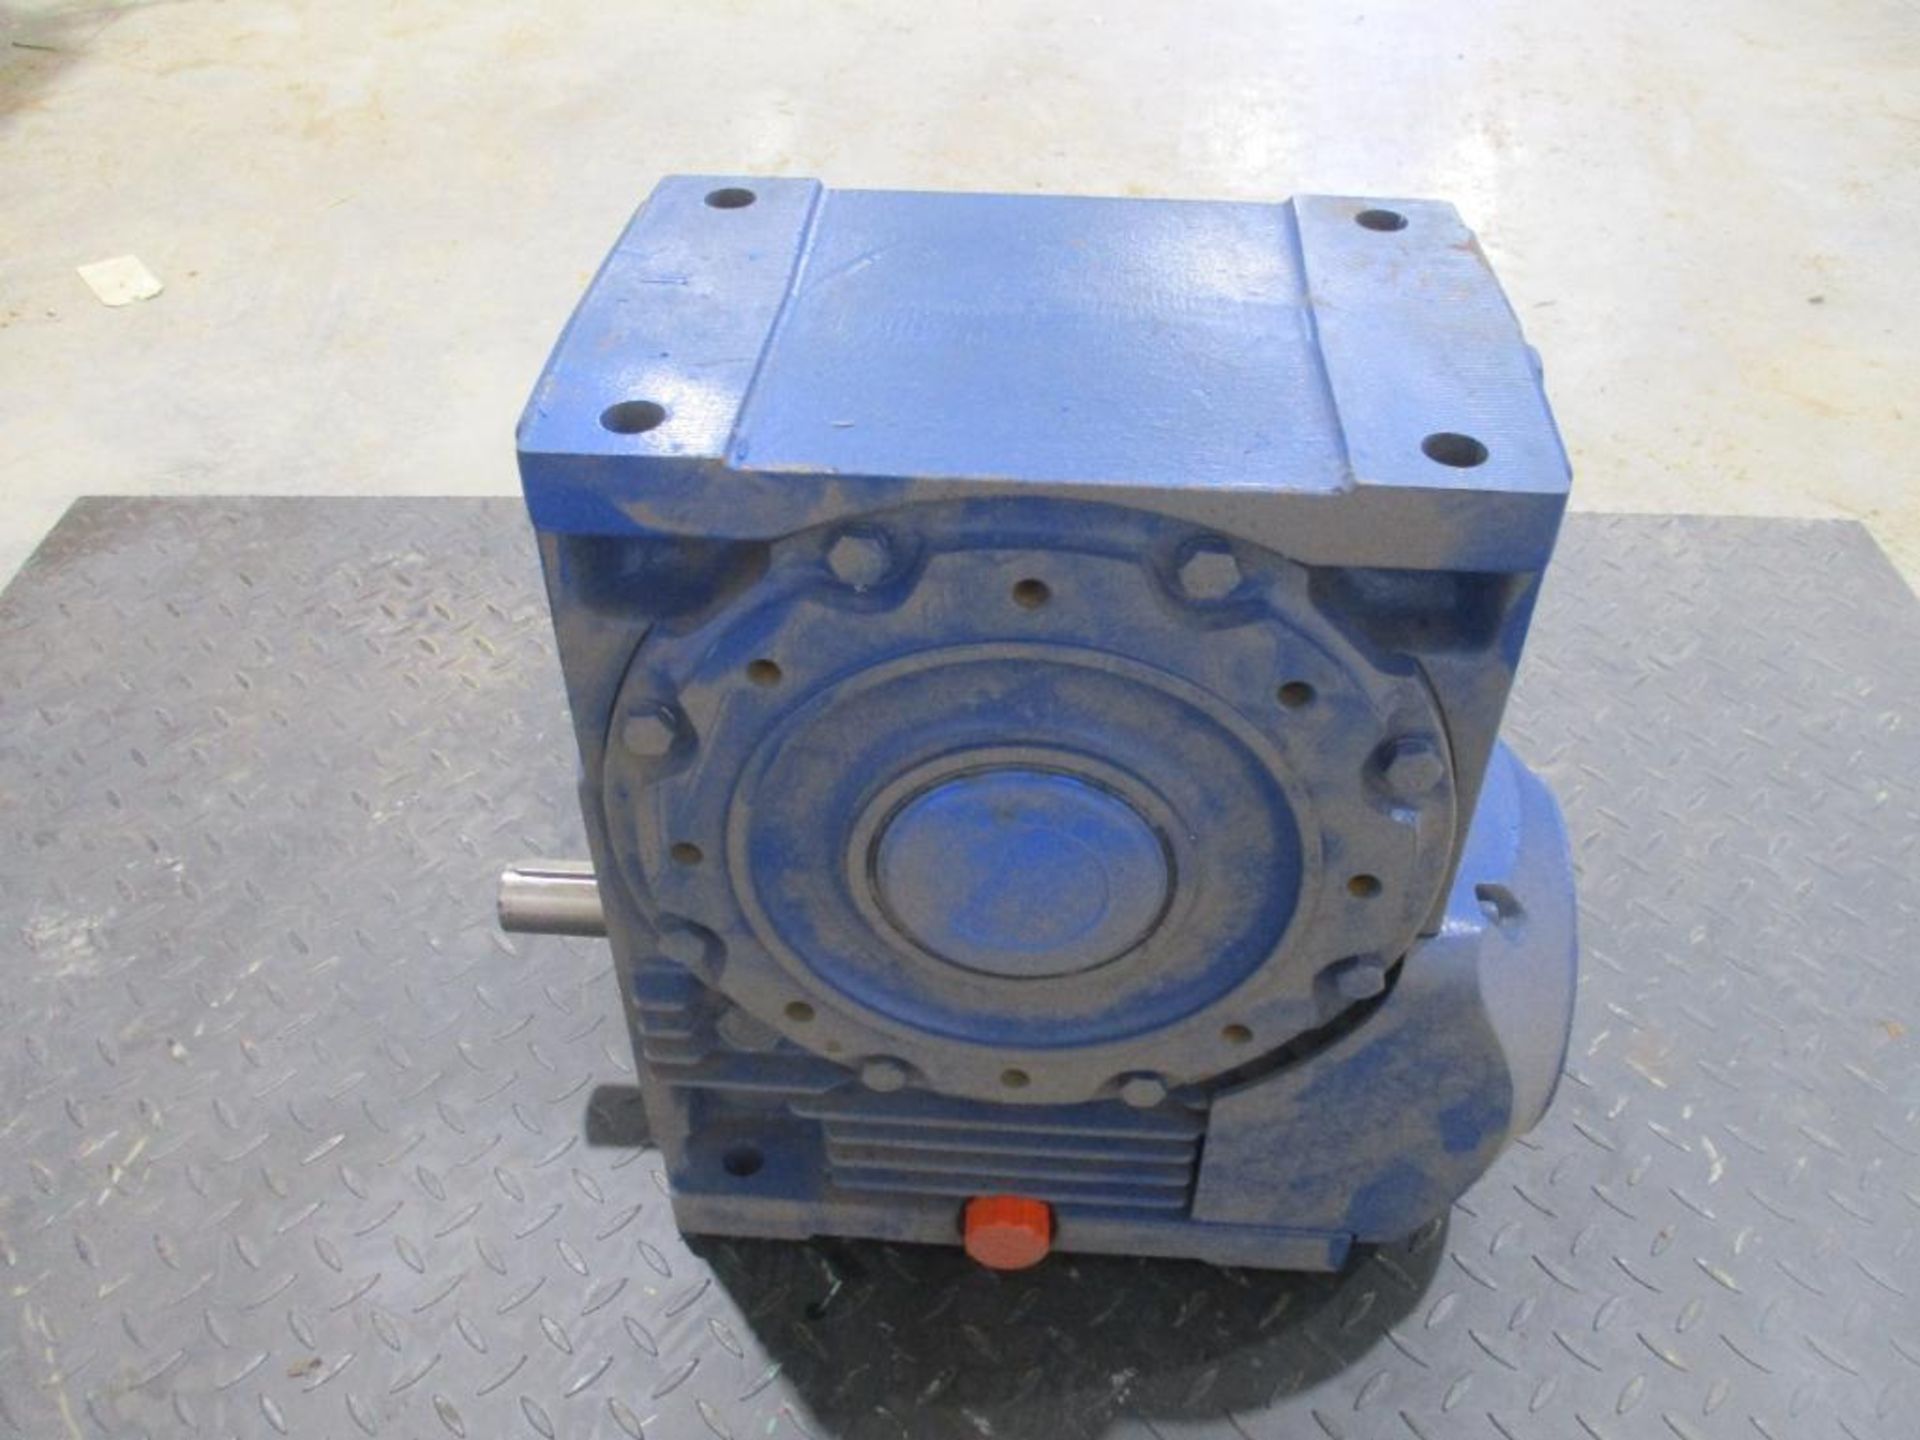 ROSSI MOTORIDUTTORI 32 RATIO REDUCER P/N RV160U02A, 279# lbs (There will be a $40 Rigging/Prep fee a - Image 3 of 5